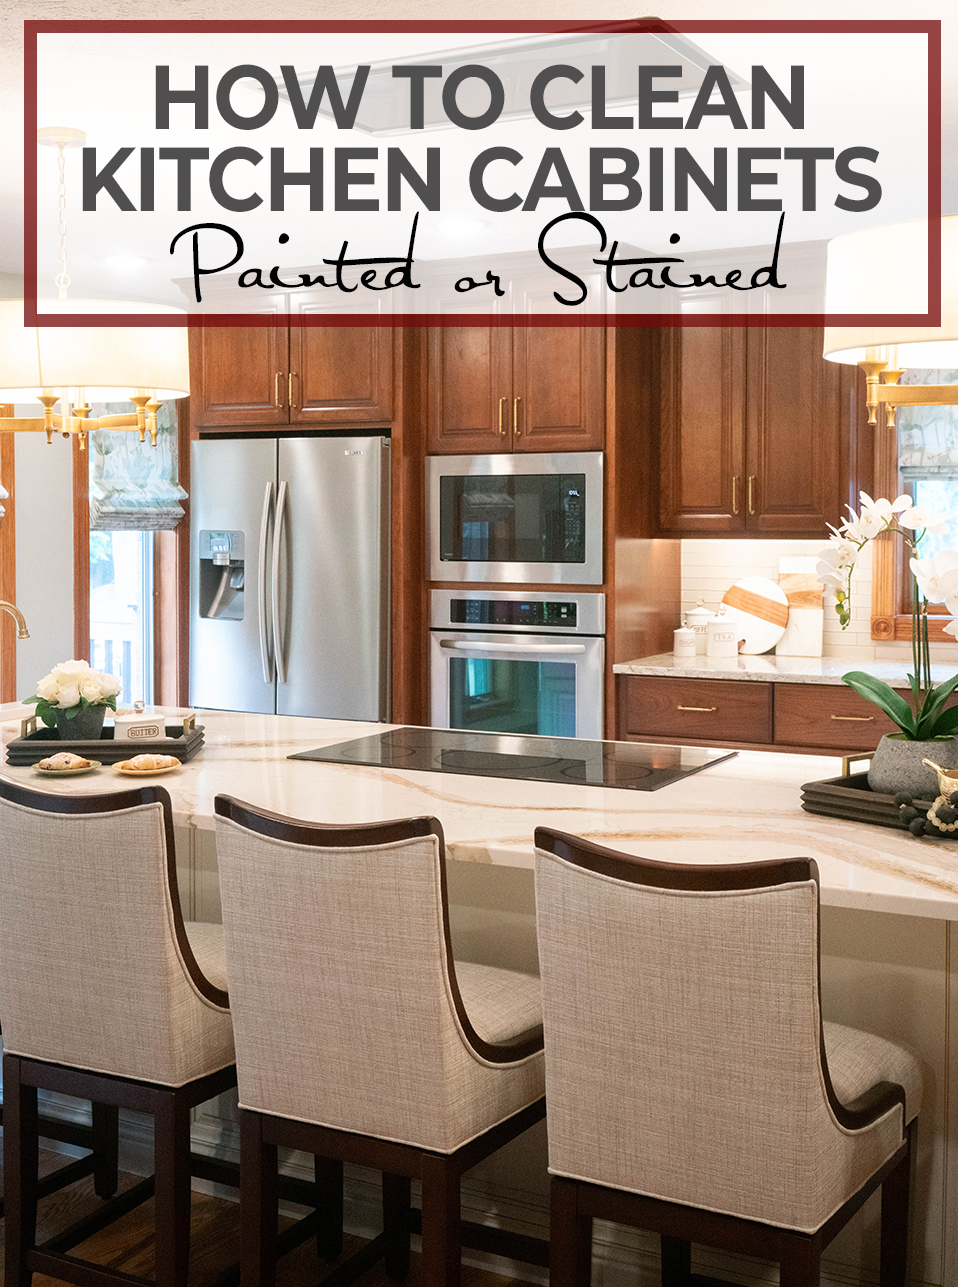 https://gmi.design/wp-content/uploads/2023/05/How-to-clean-kitchen-cabinets.jpg